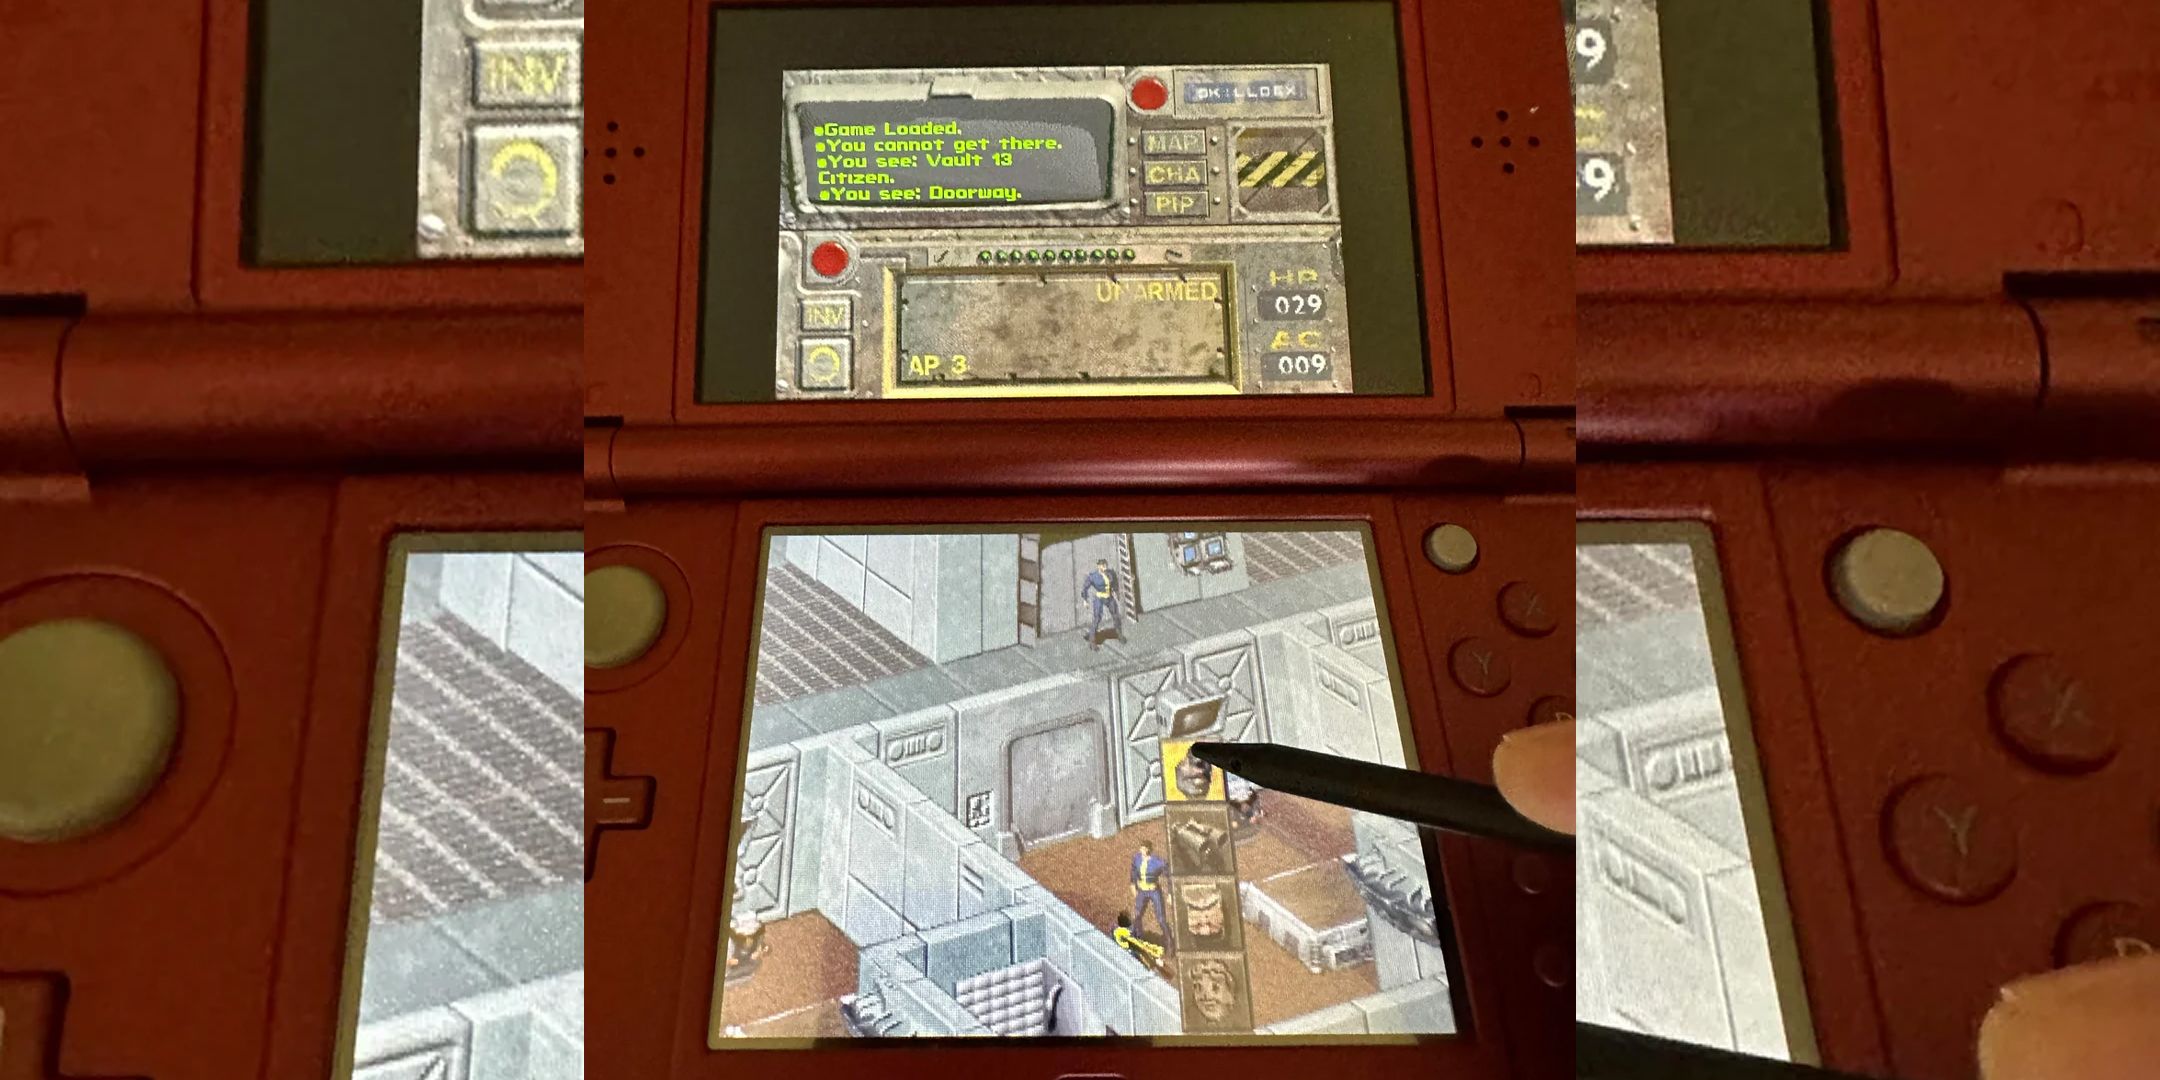 Original Fallout game on a red 3DS, player using stylus to navigate UI